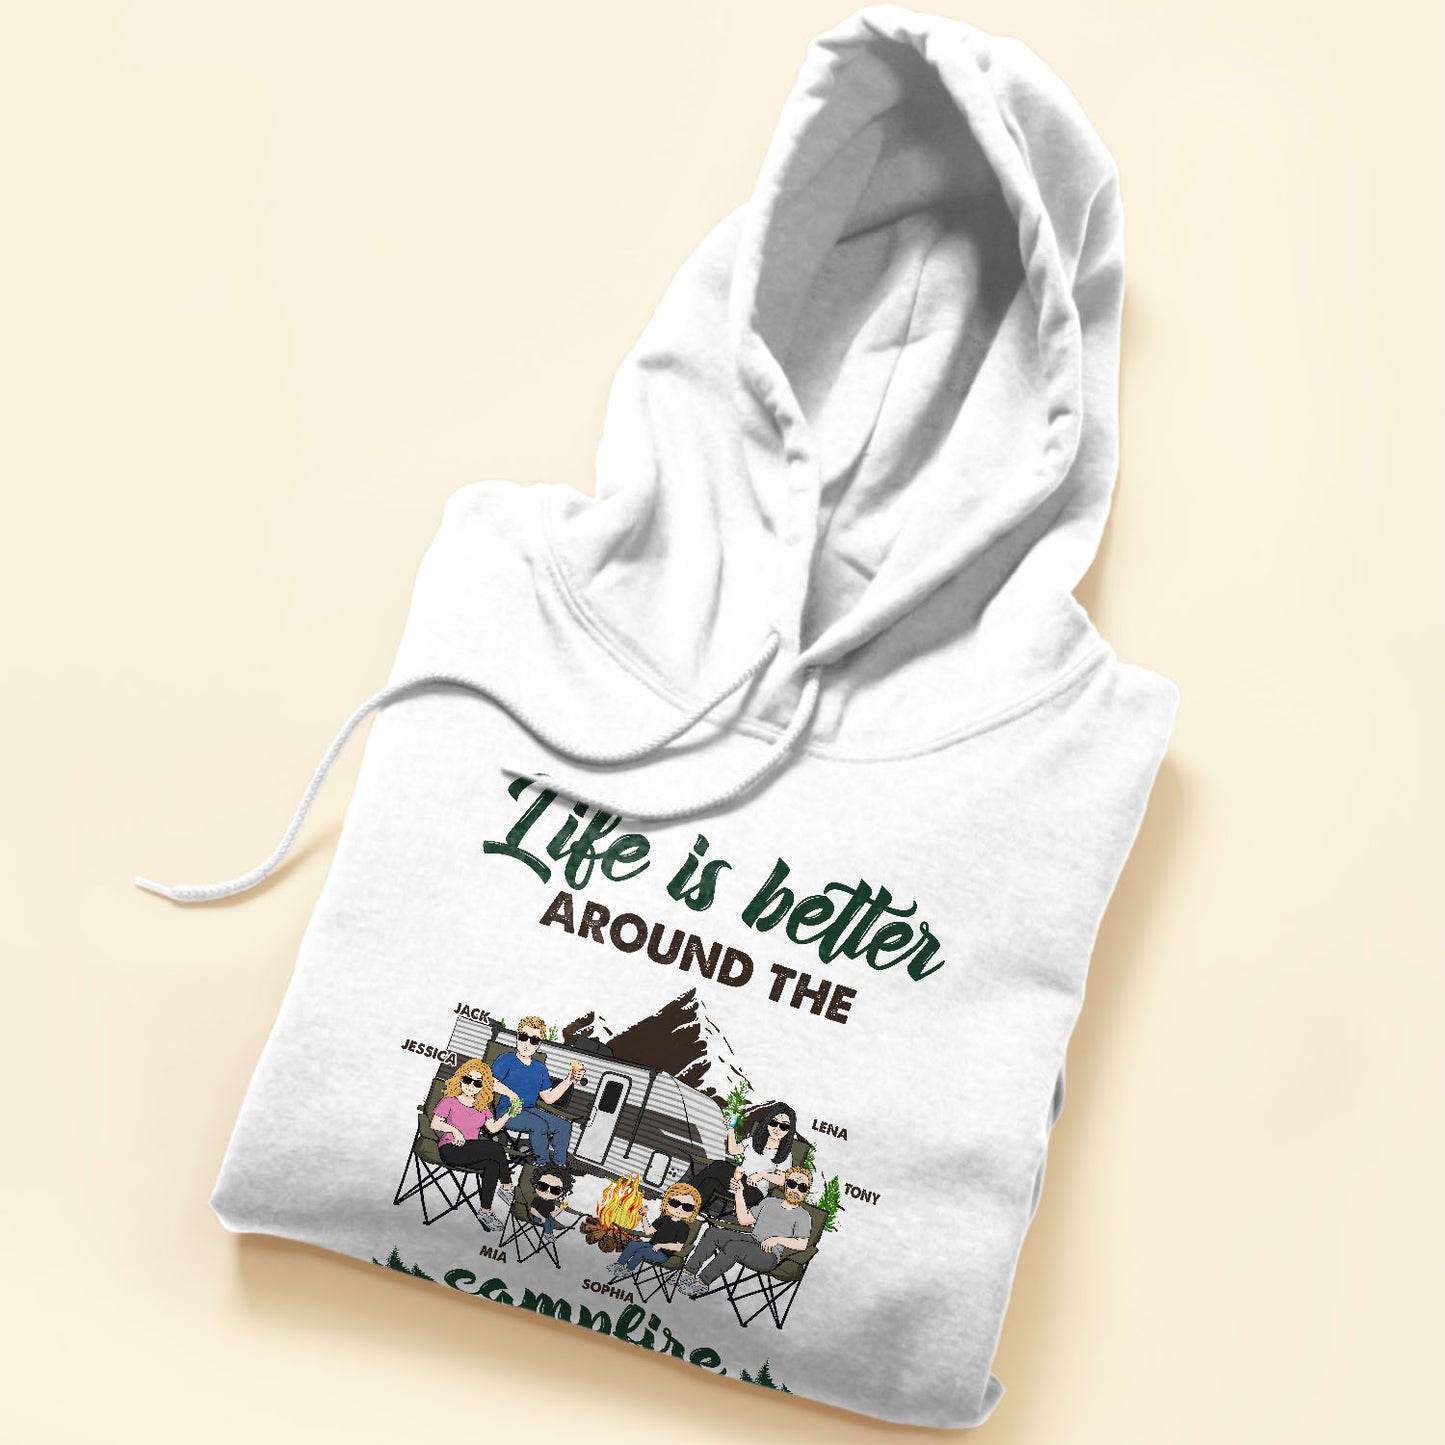 Around The Campfire With Our Family - Personalized Shirt - Gift For Family Members, Dad, Mom, Brother, Sister, Grandparents, Matching Family Shirt, Camping Trip